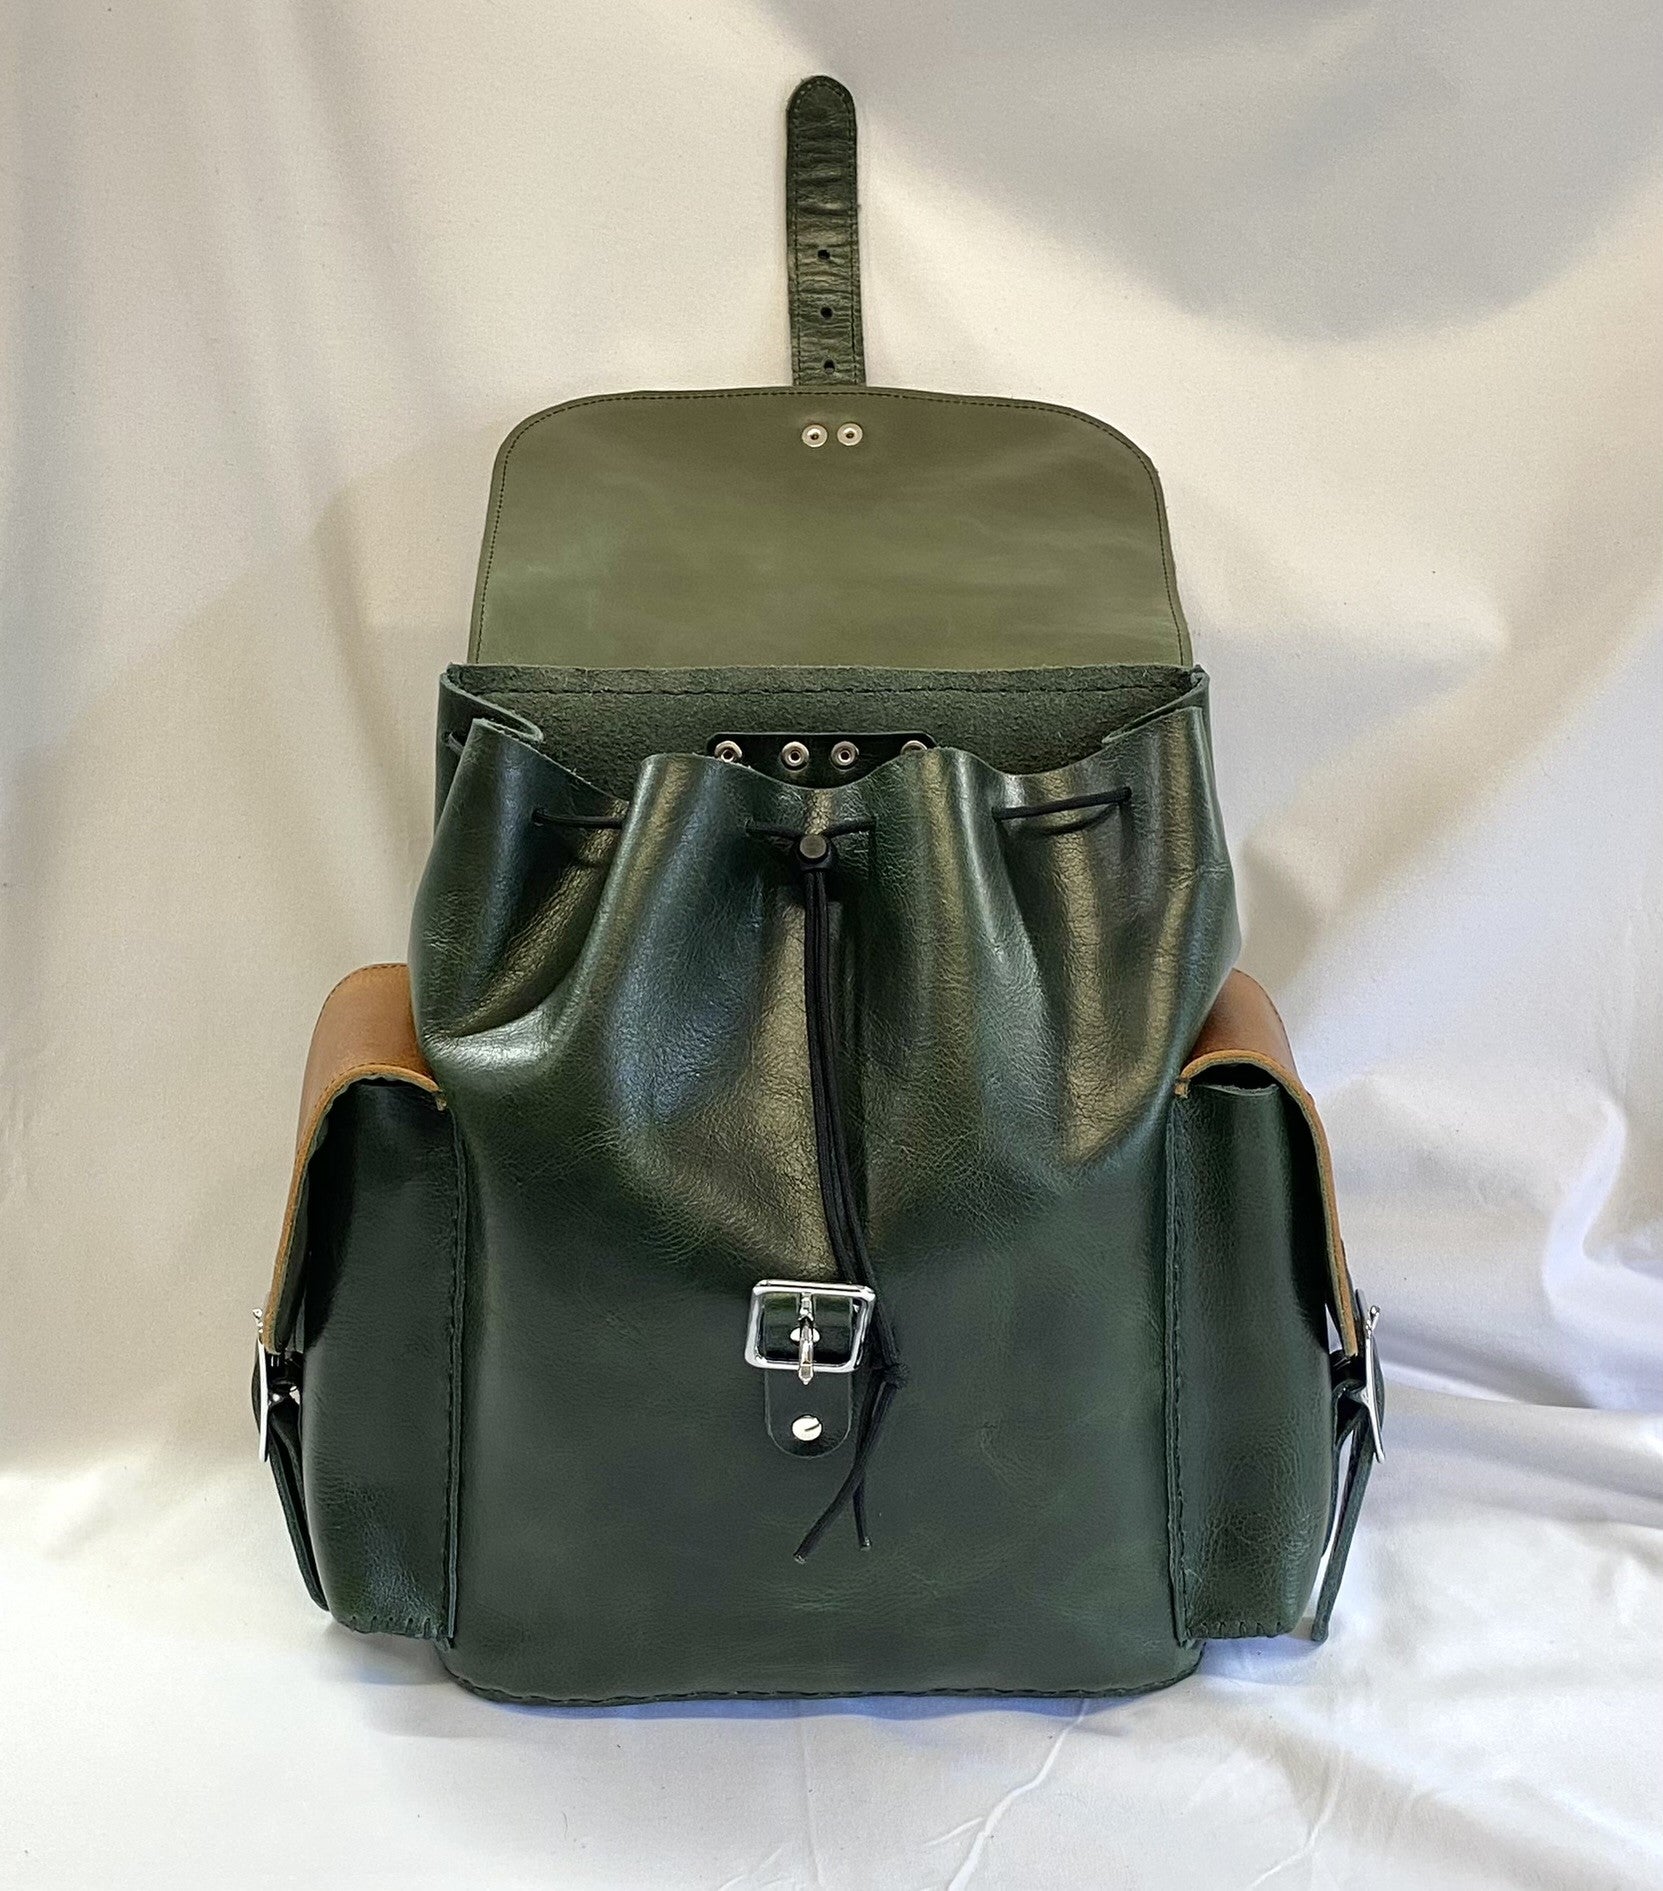 The Chey Backpack